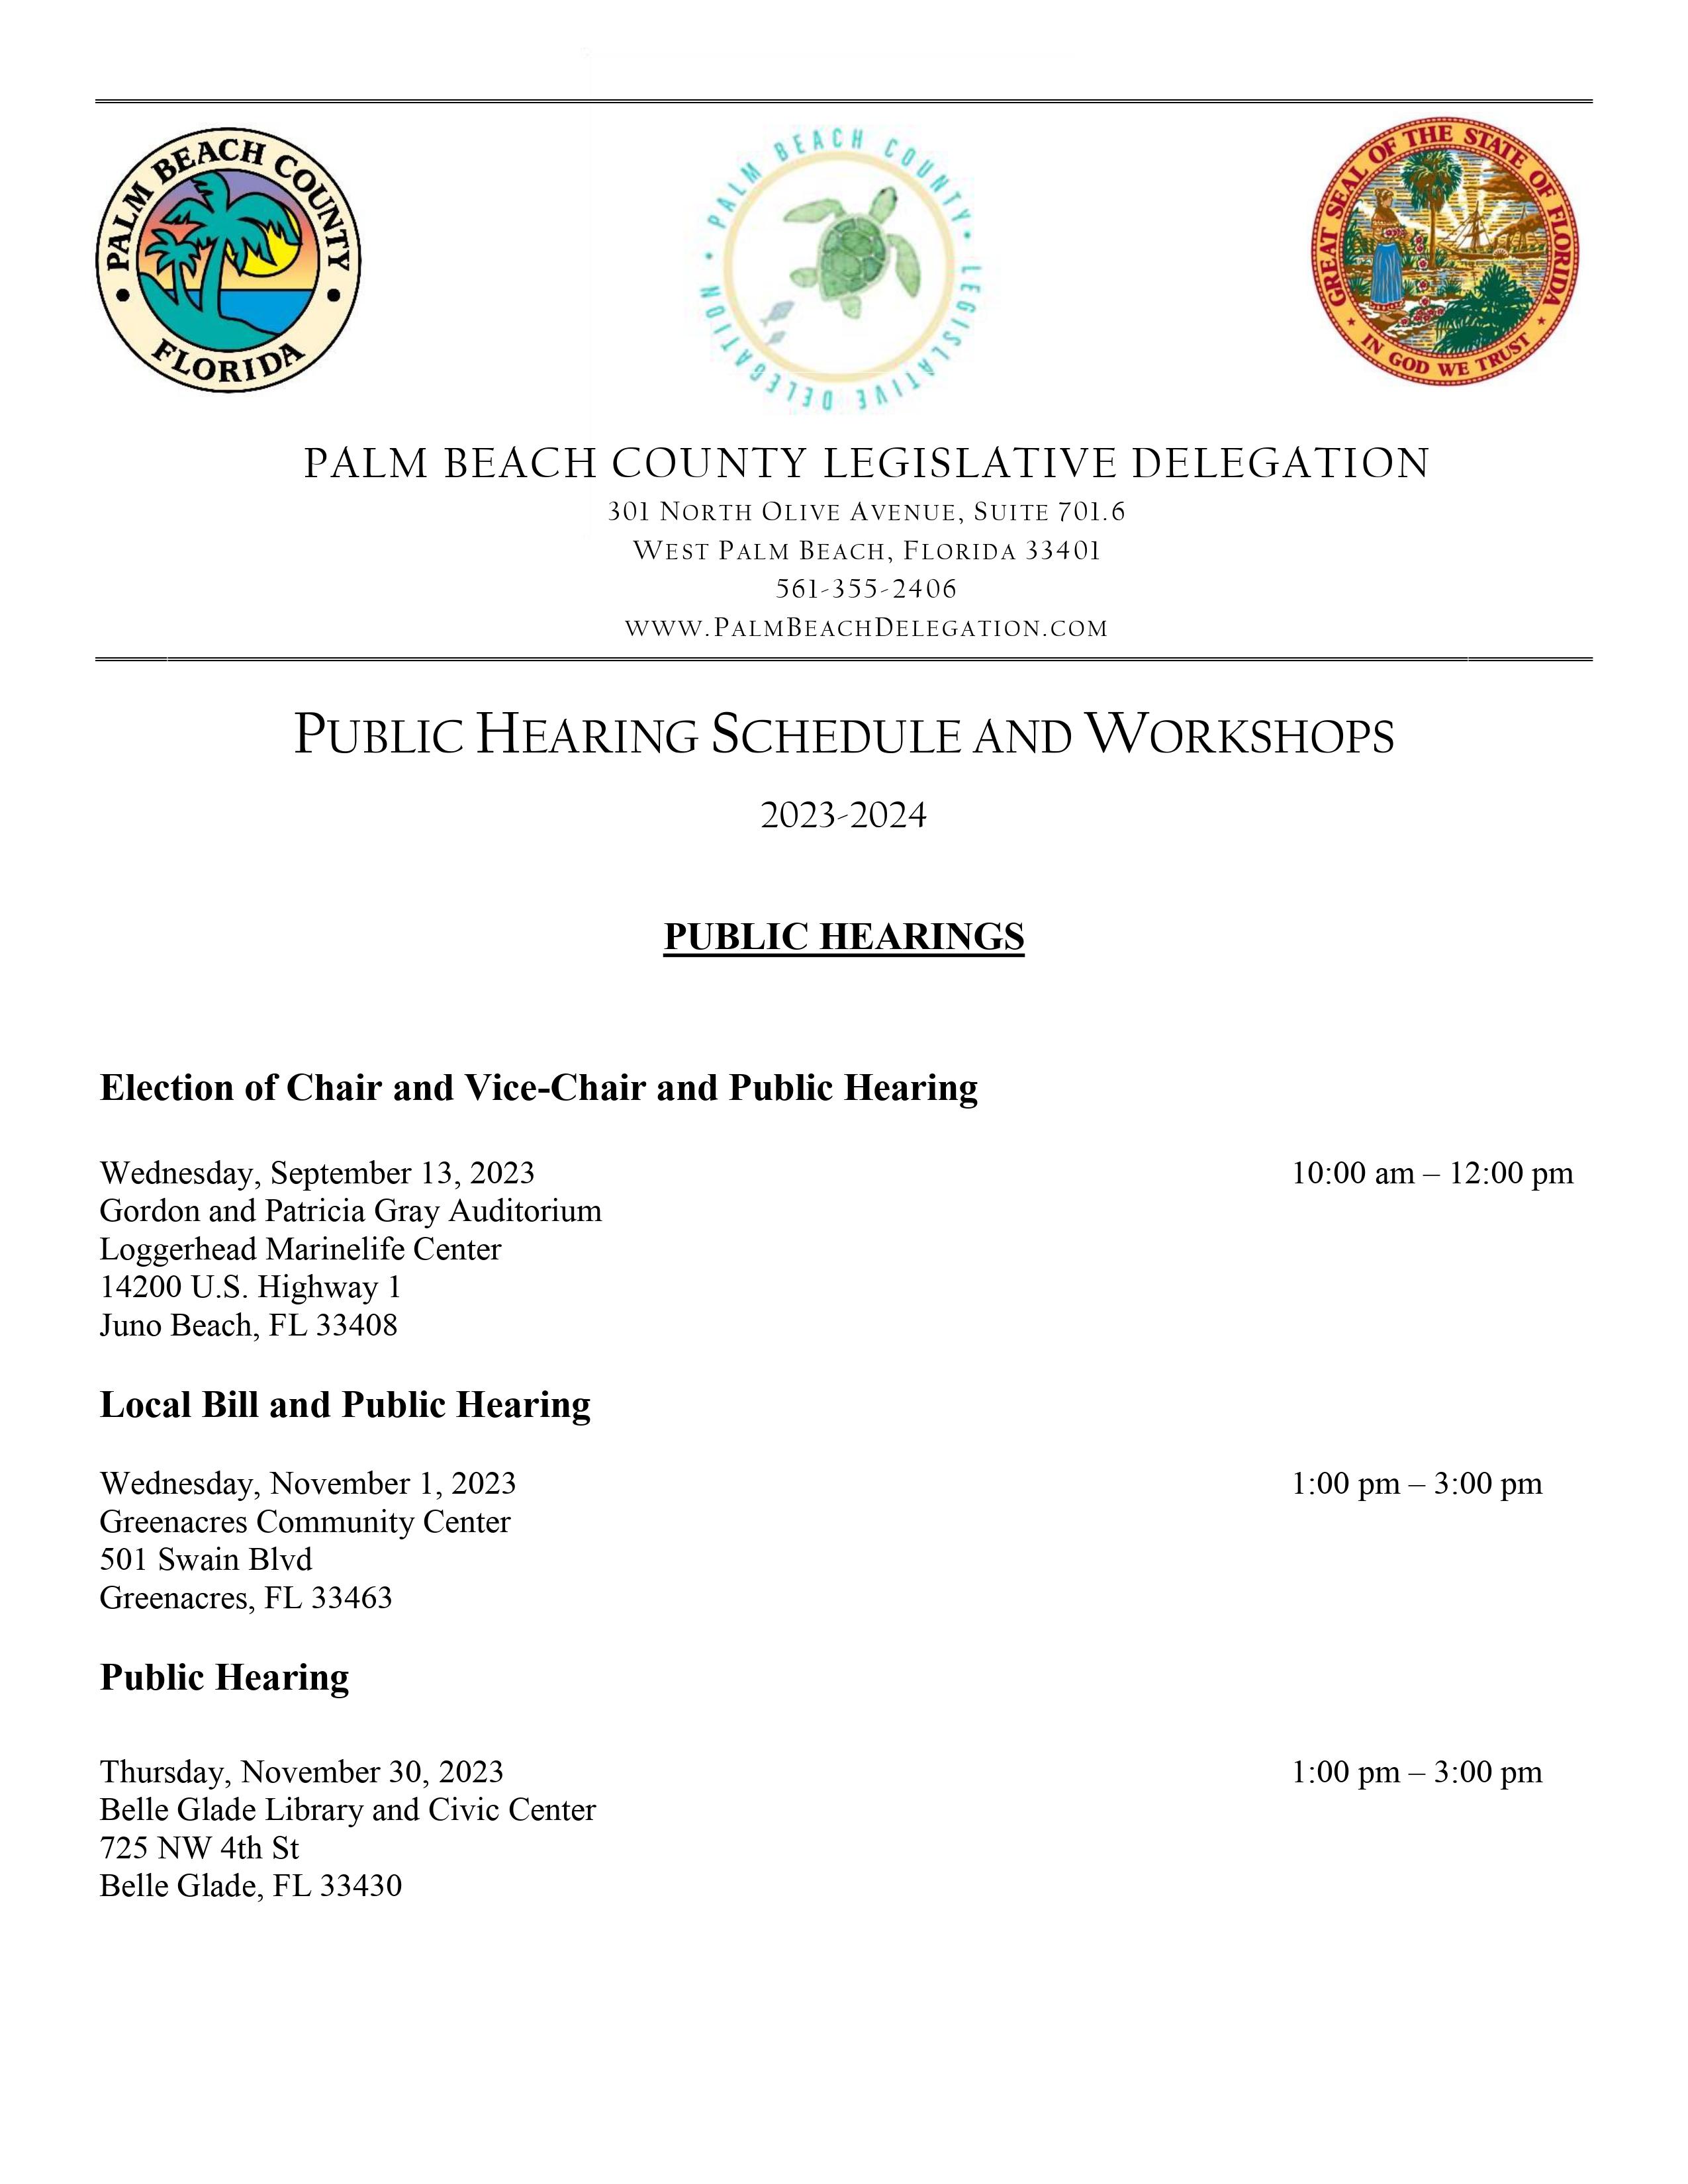 Page number 1 of the 2023-2024 Hearing and Workshop Schedule.